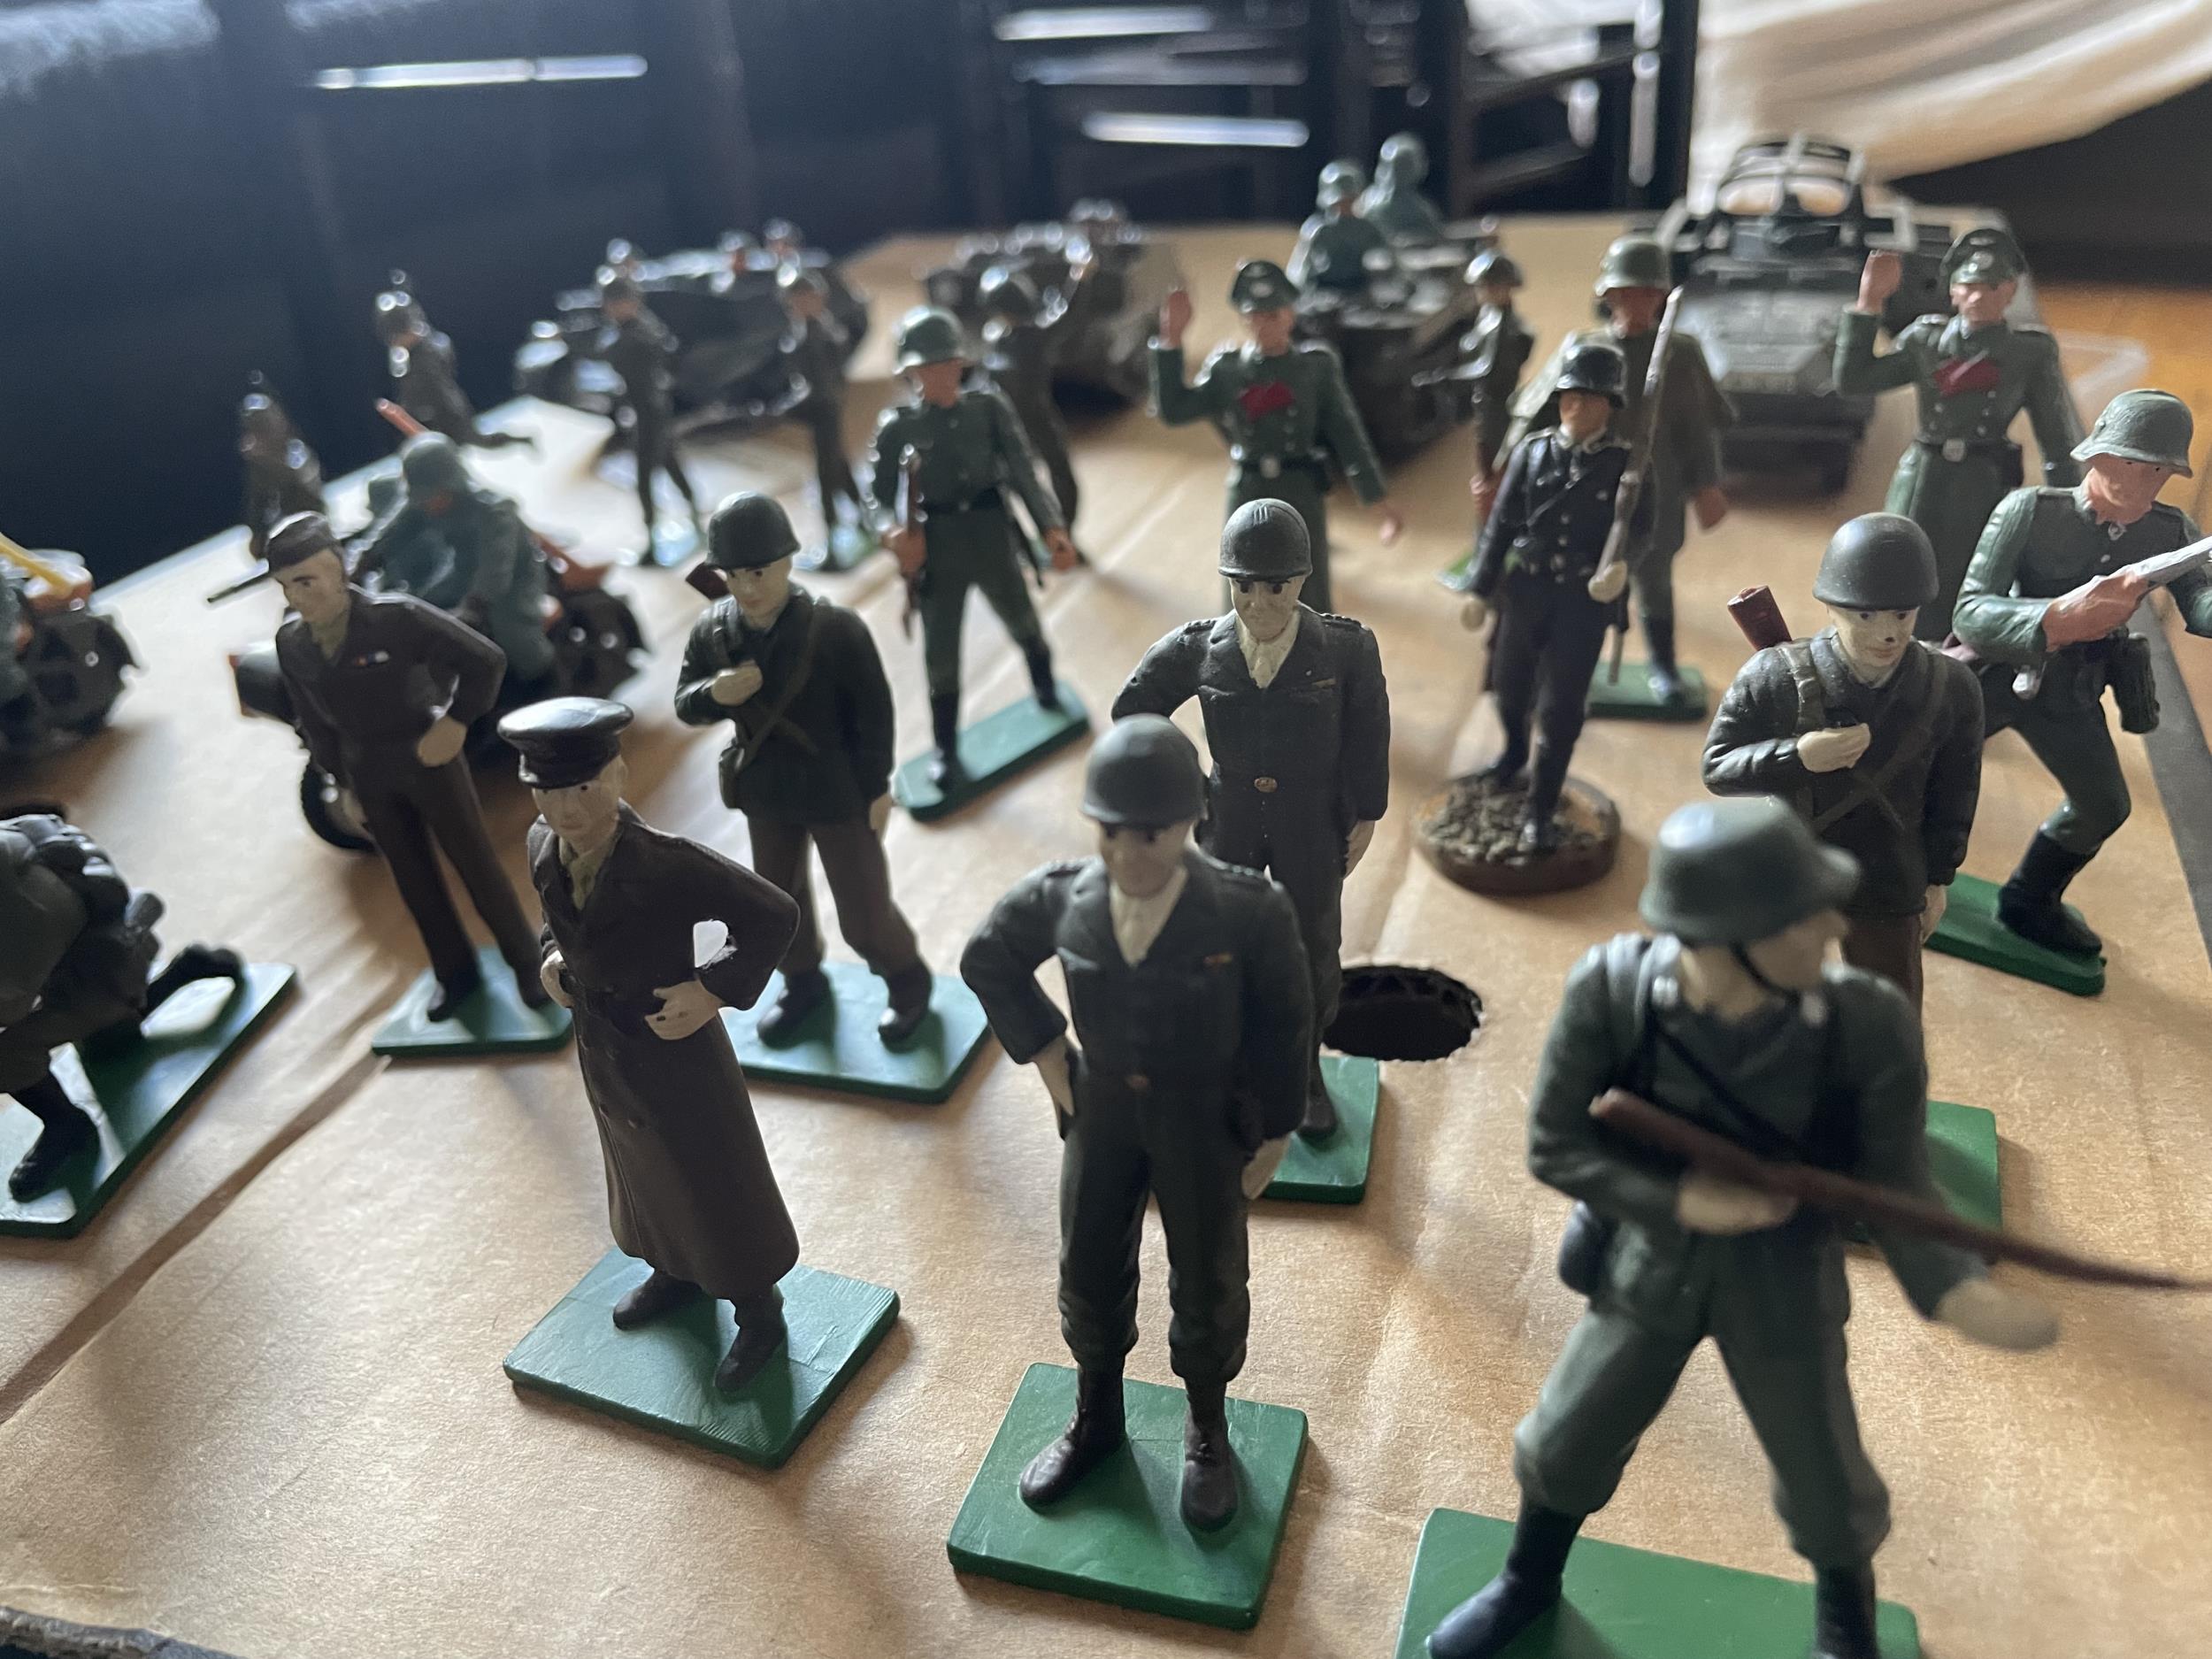 THIRTY UNBOXED WWII METAL AND PLASTIC MILITARY FIGURES AND VEHICLES - TWO BRITAINS BMW AND SIDECARS, - Image 9 of 11